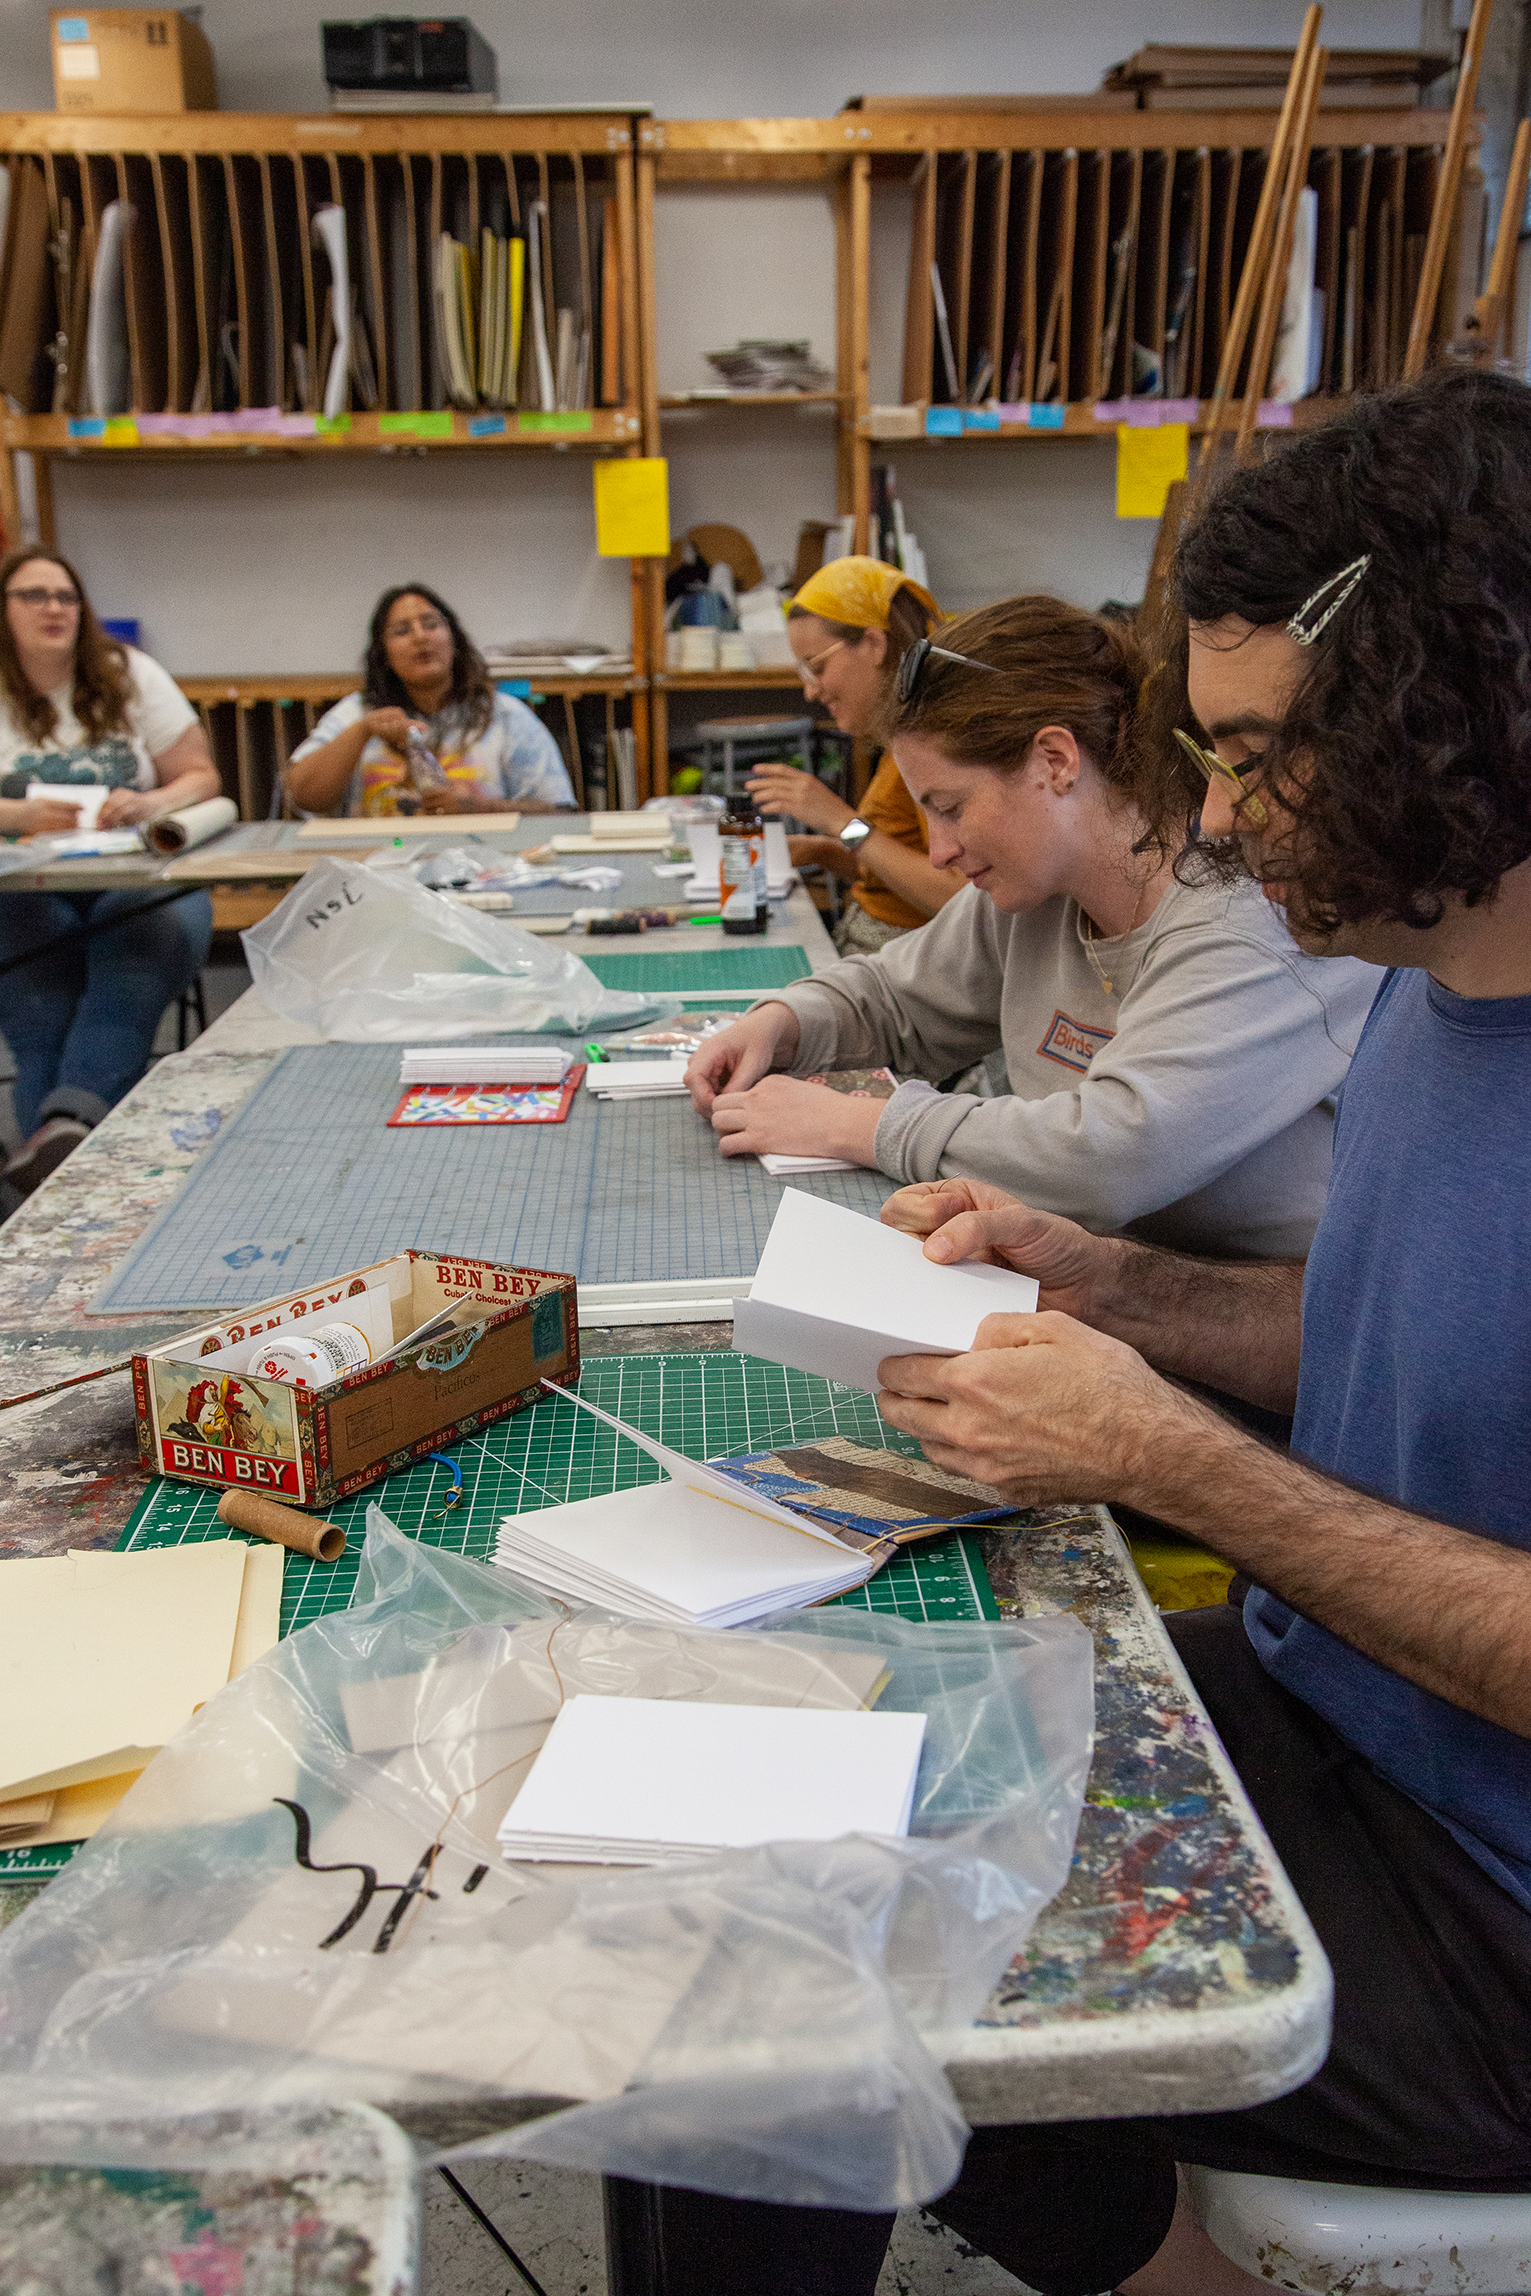 A group of students work on bookbinding projects together.